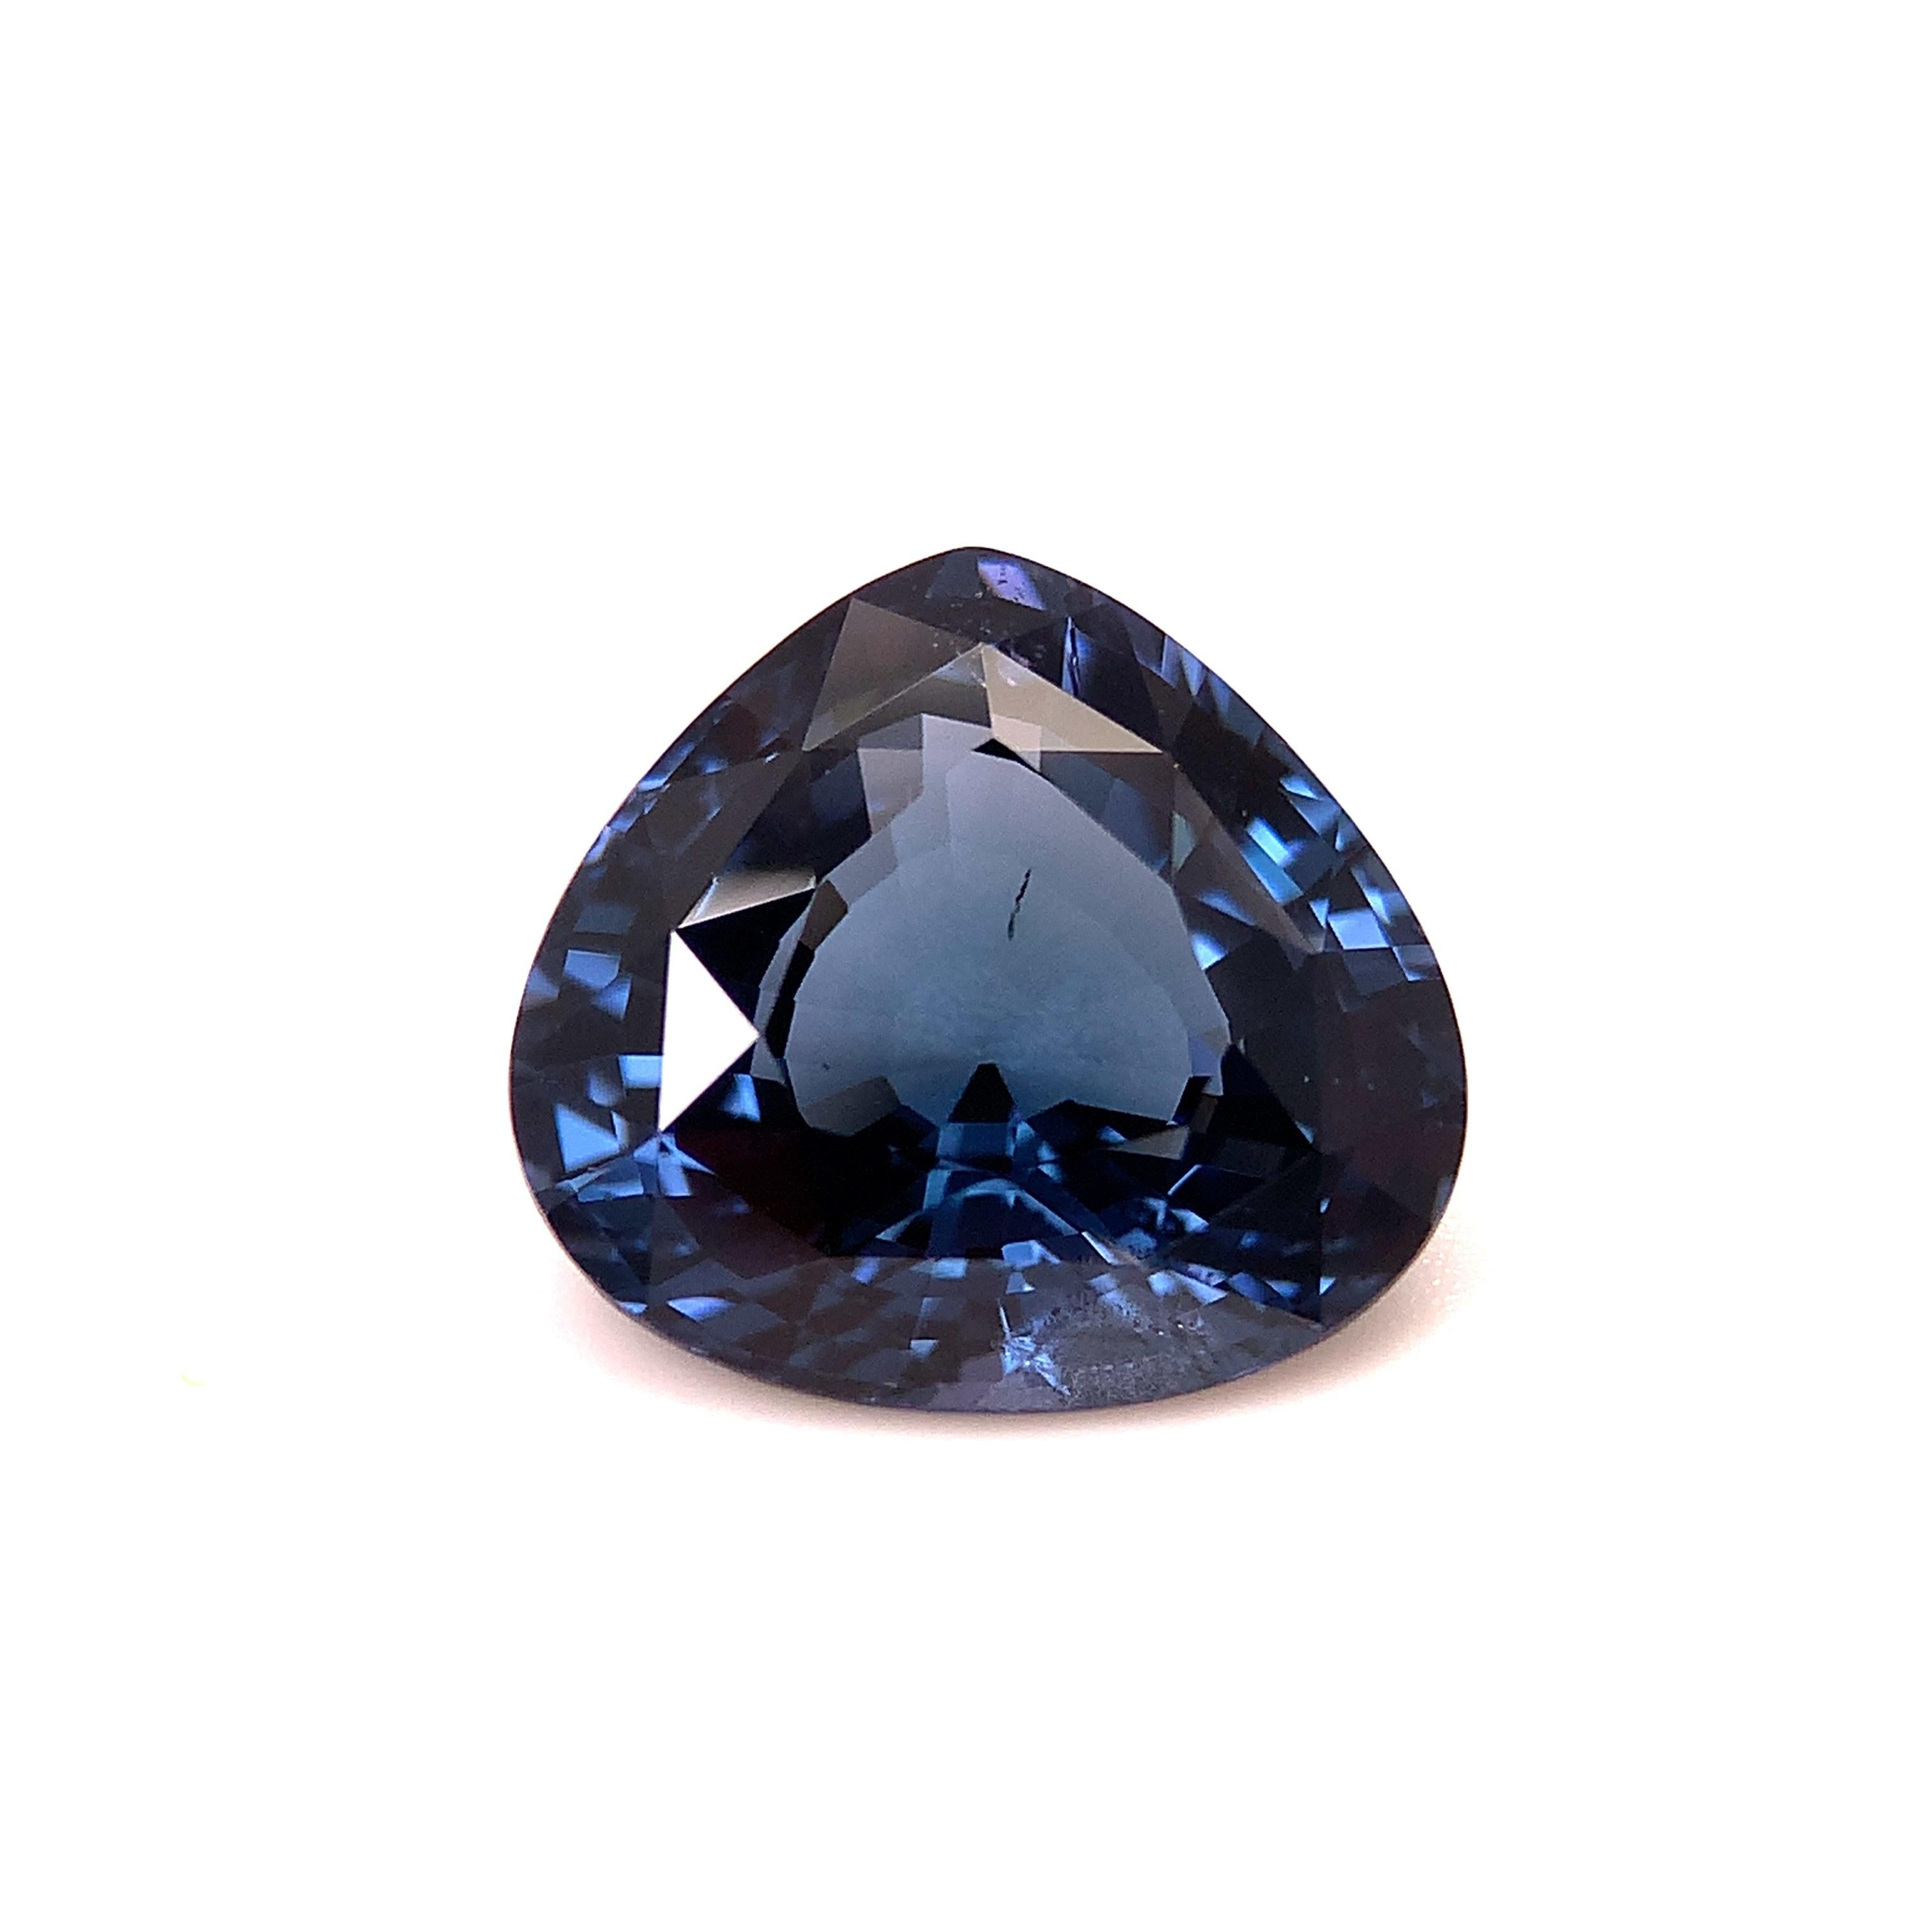 Unheated 5.02 Carat Blue Spinel, Loose Gemstone, GIA Certified ..... A For Sale 2